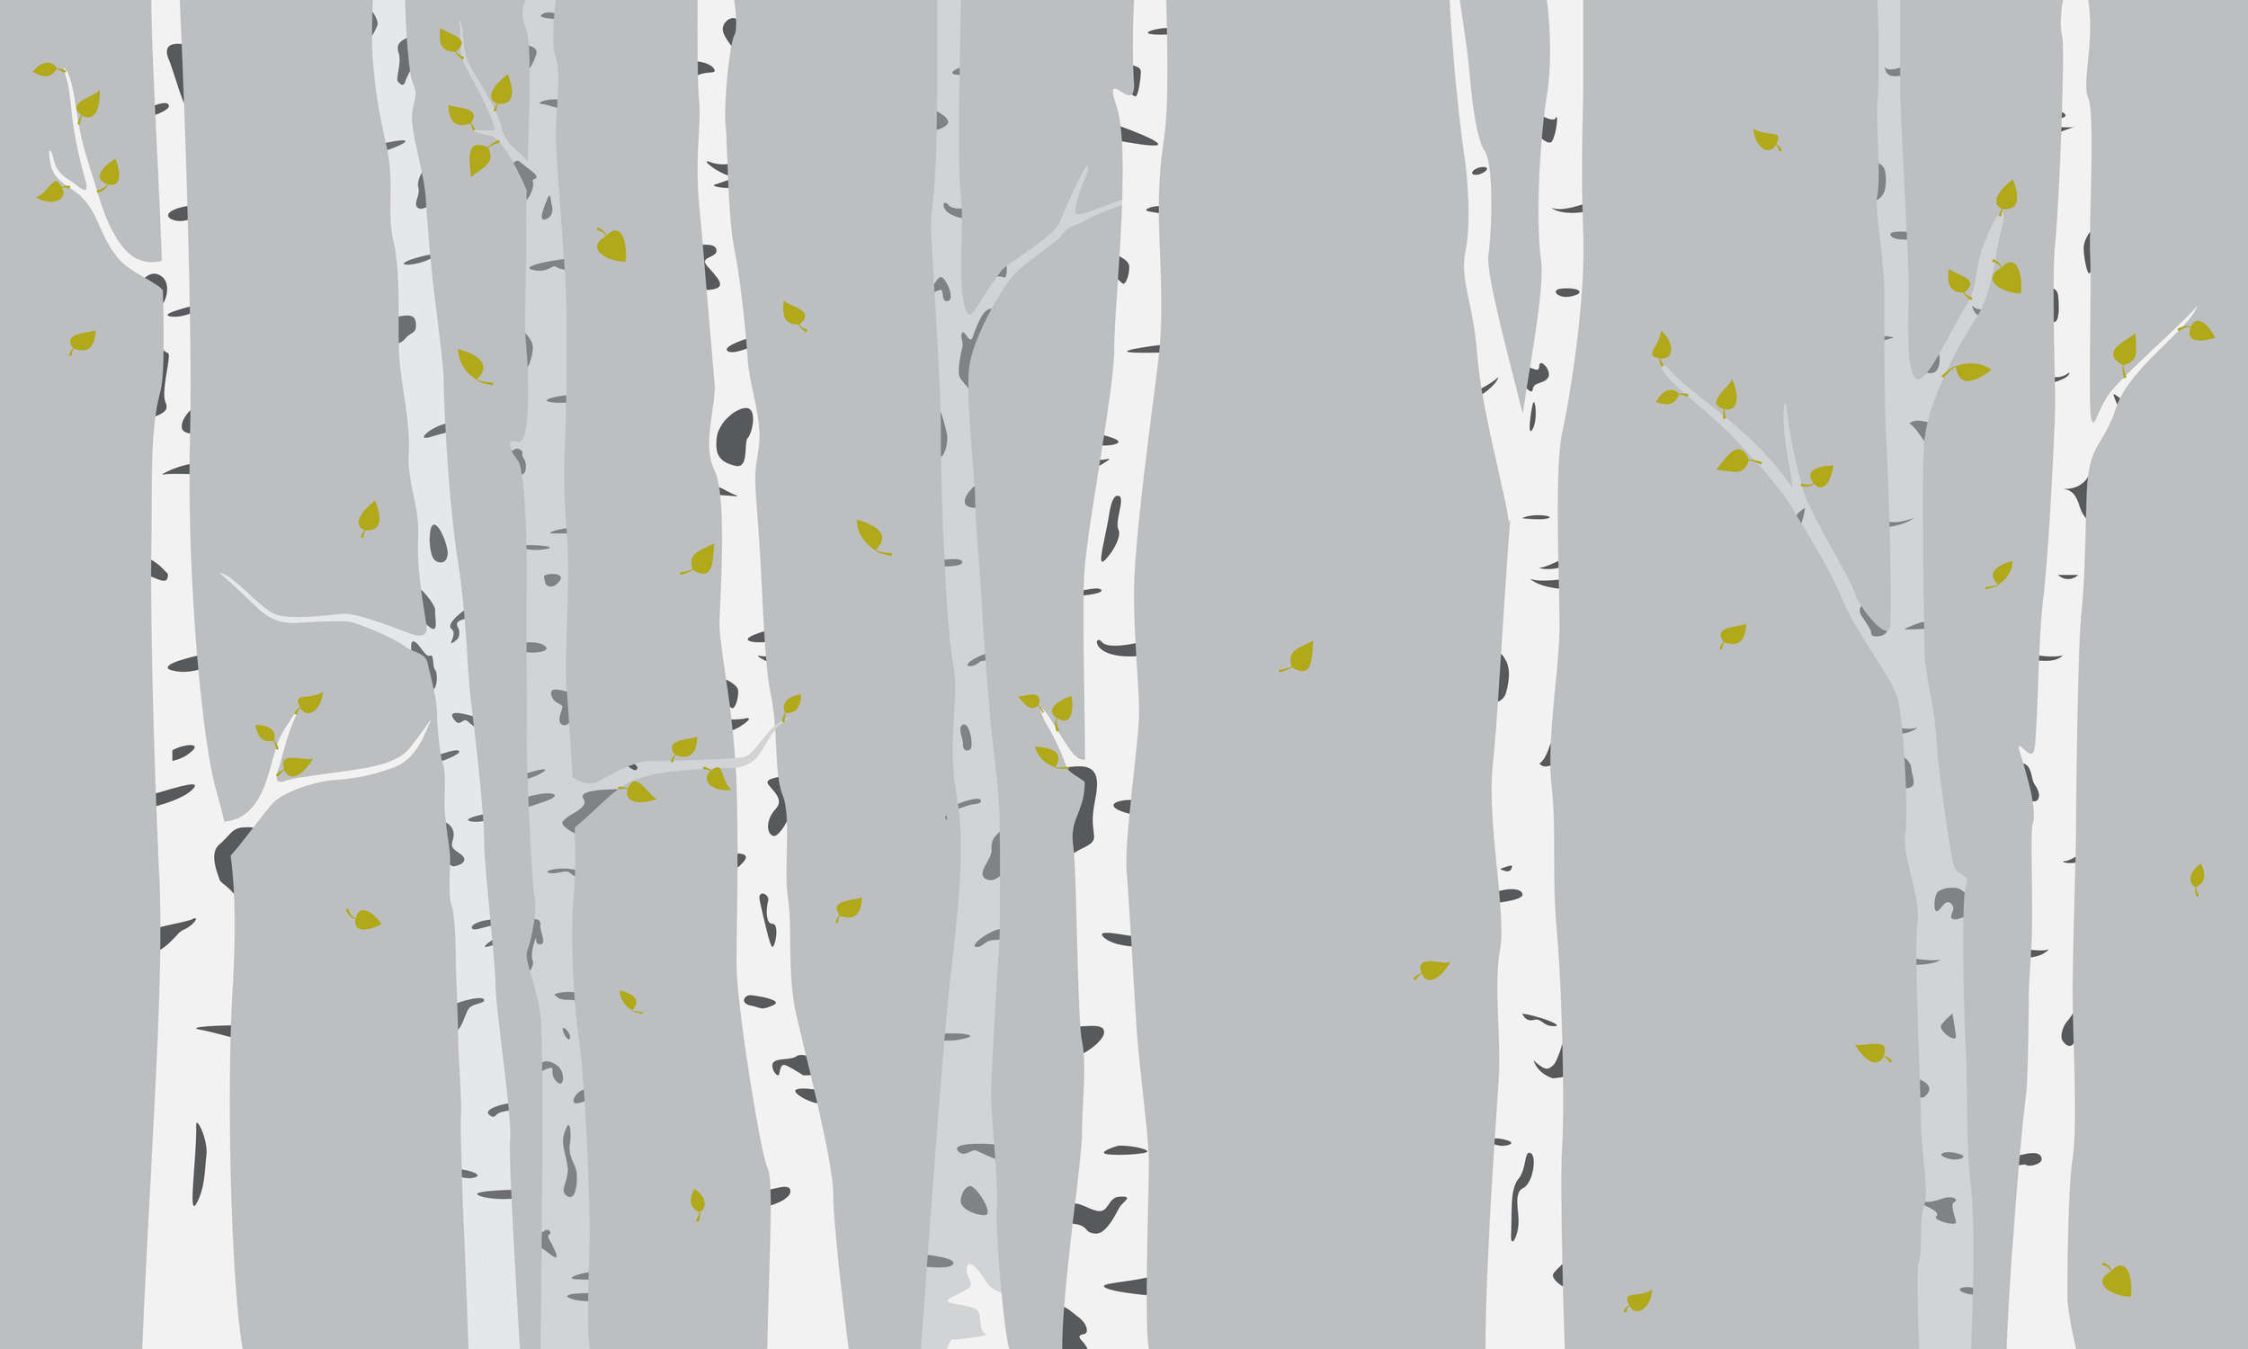             Photo wallpaper with painted birch forest for children's room - textured non-woven
        